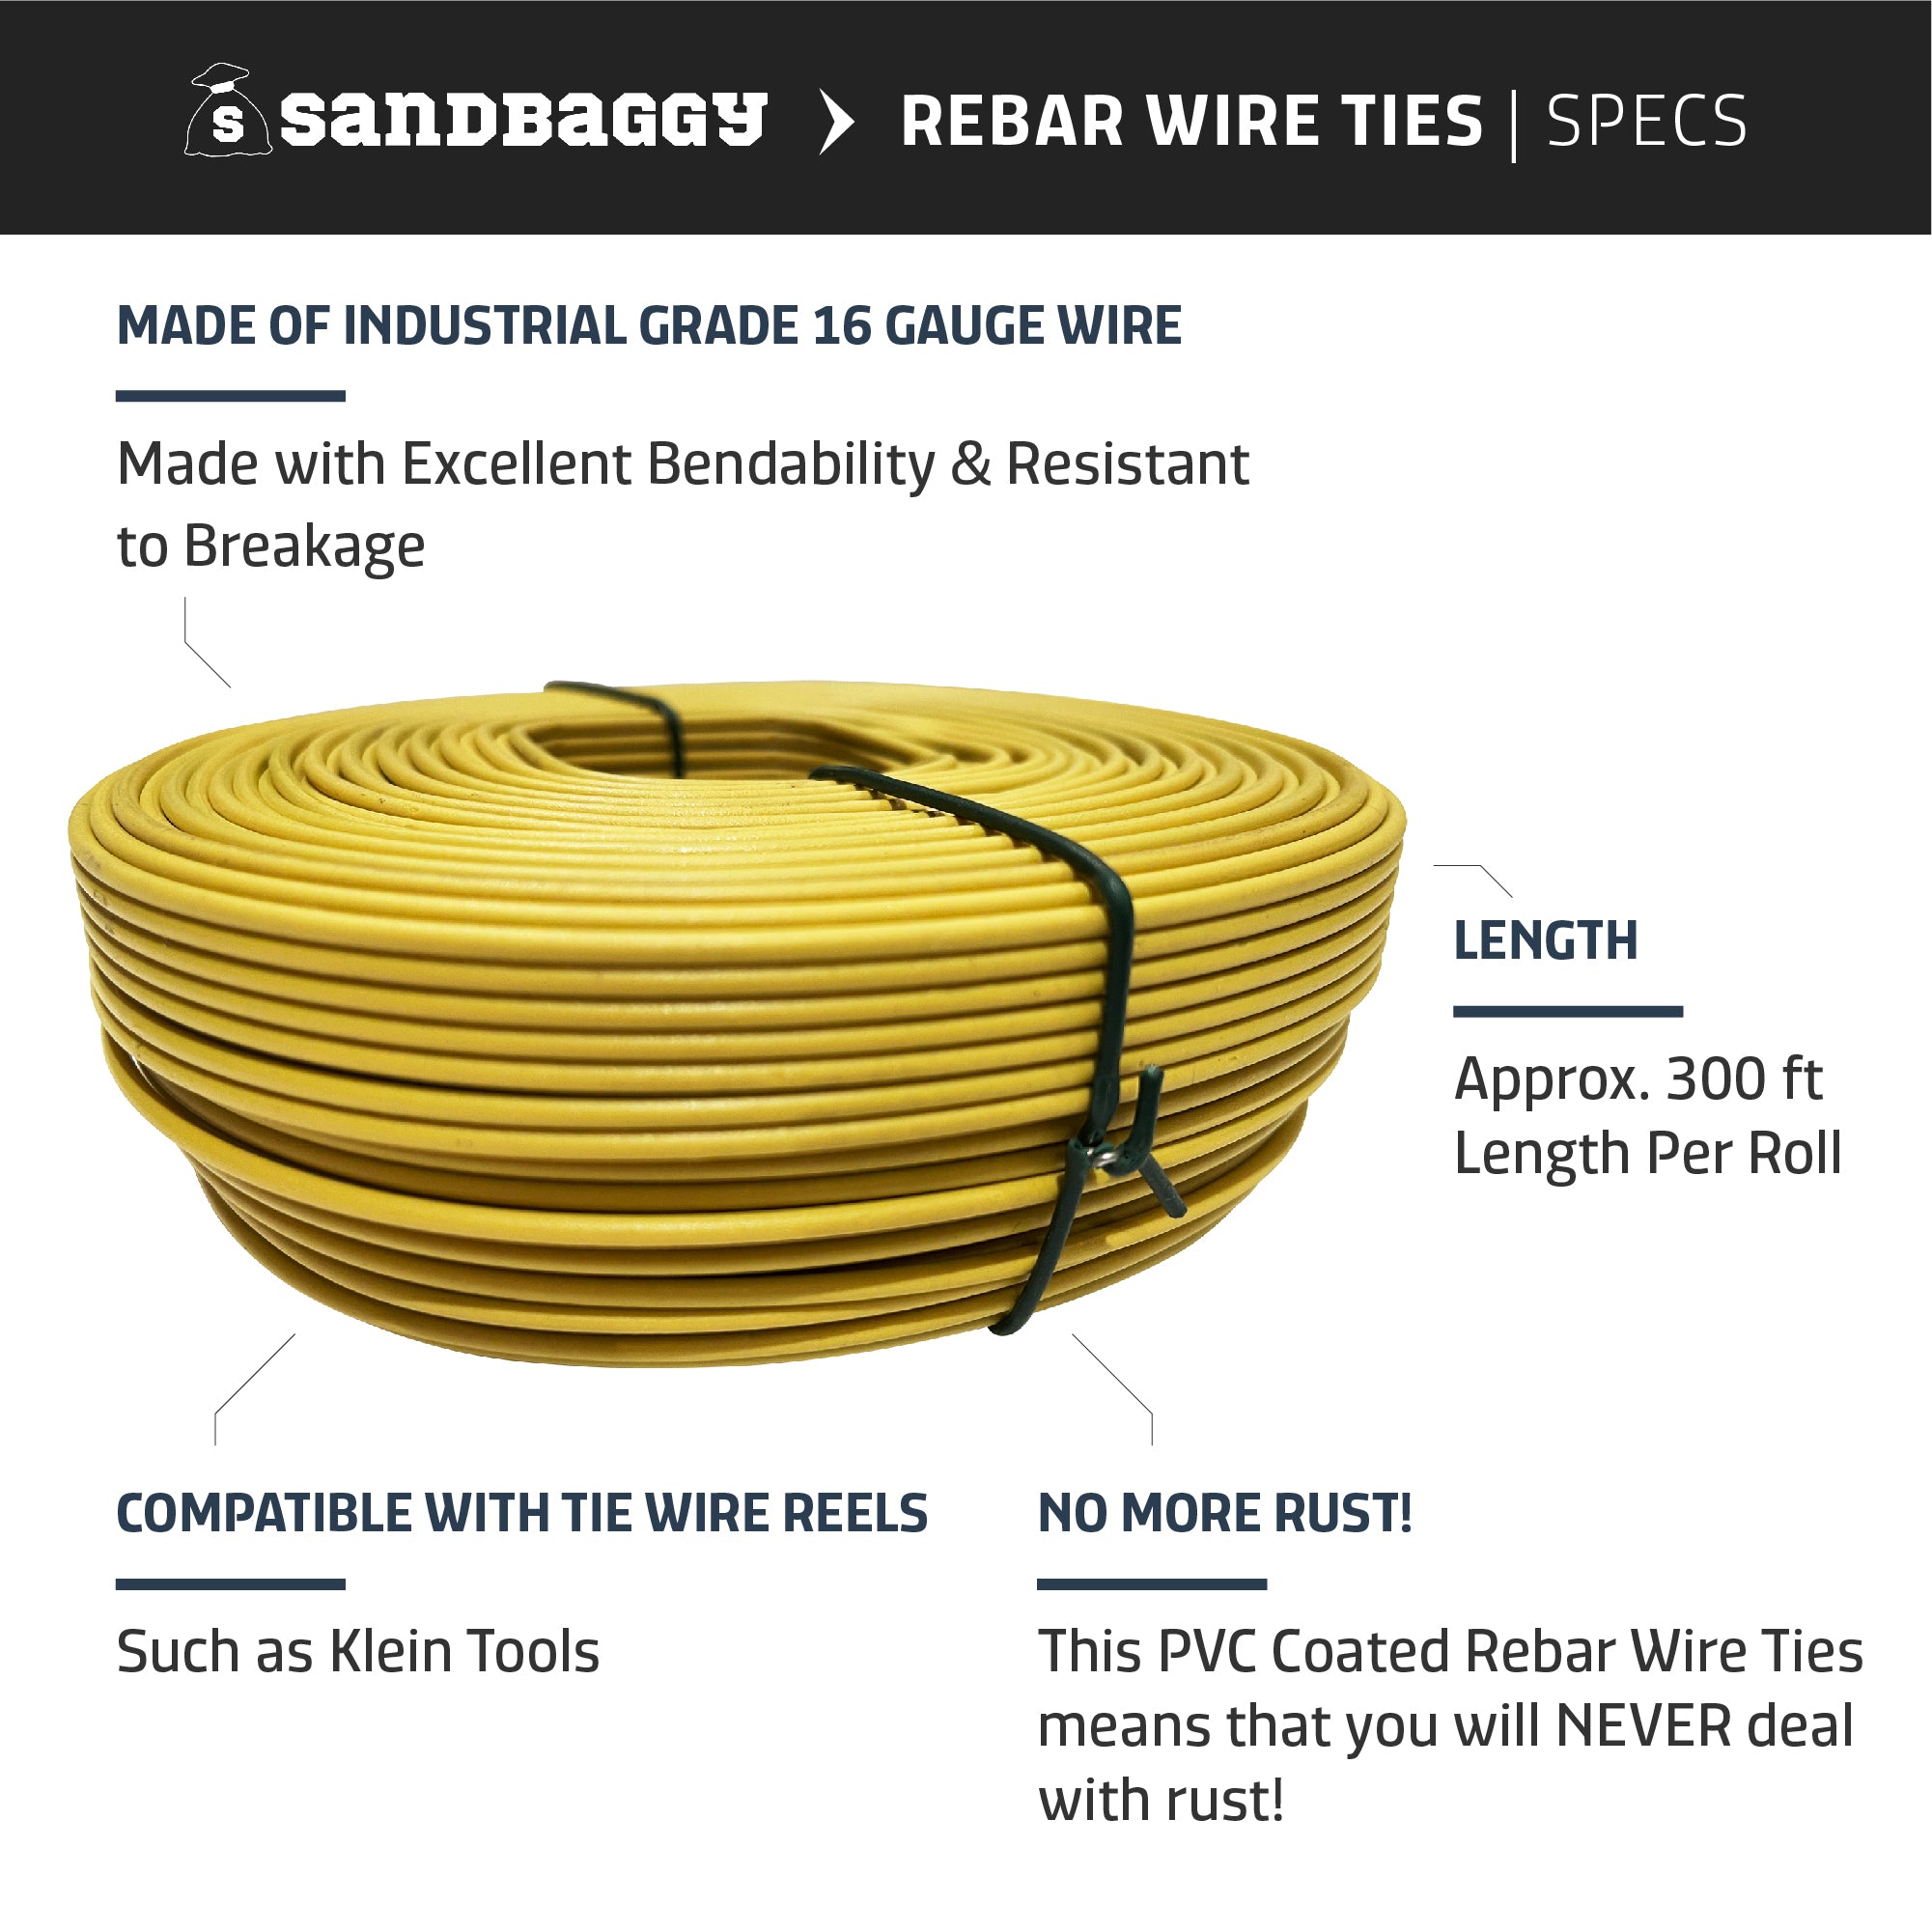 Sandbaggy Plastic Rebar Tie Wire Reel - Holds up to 400 ft of 12-20 Gauge  Wire - Ambidextrous Rewind Knob, Built-In Belt Loops - Resistant To Rust &  Corrosion (120) 